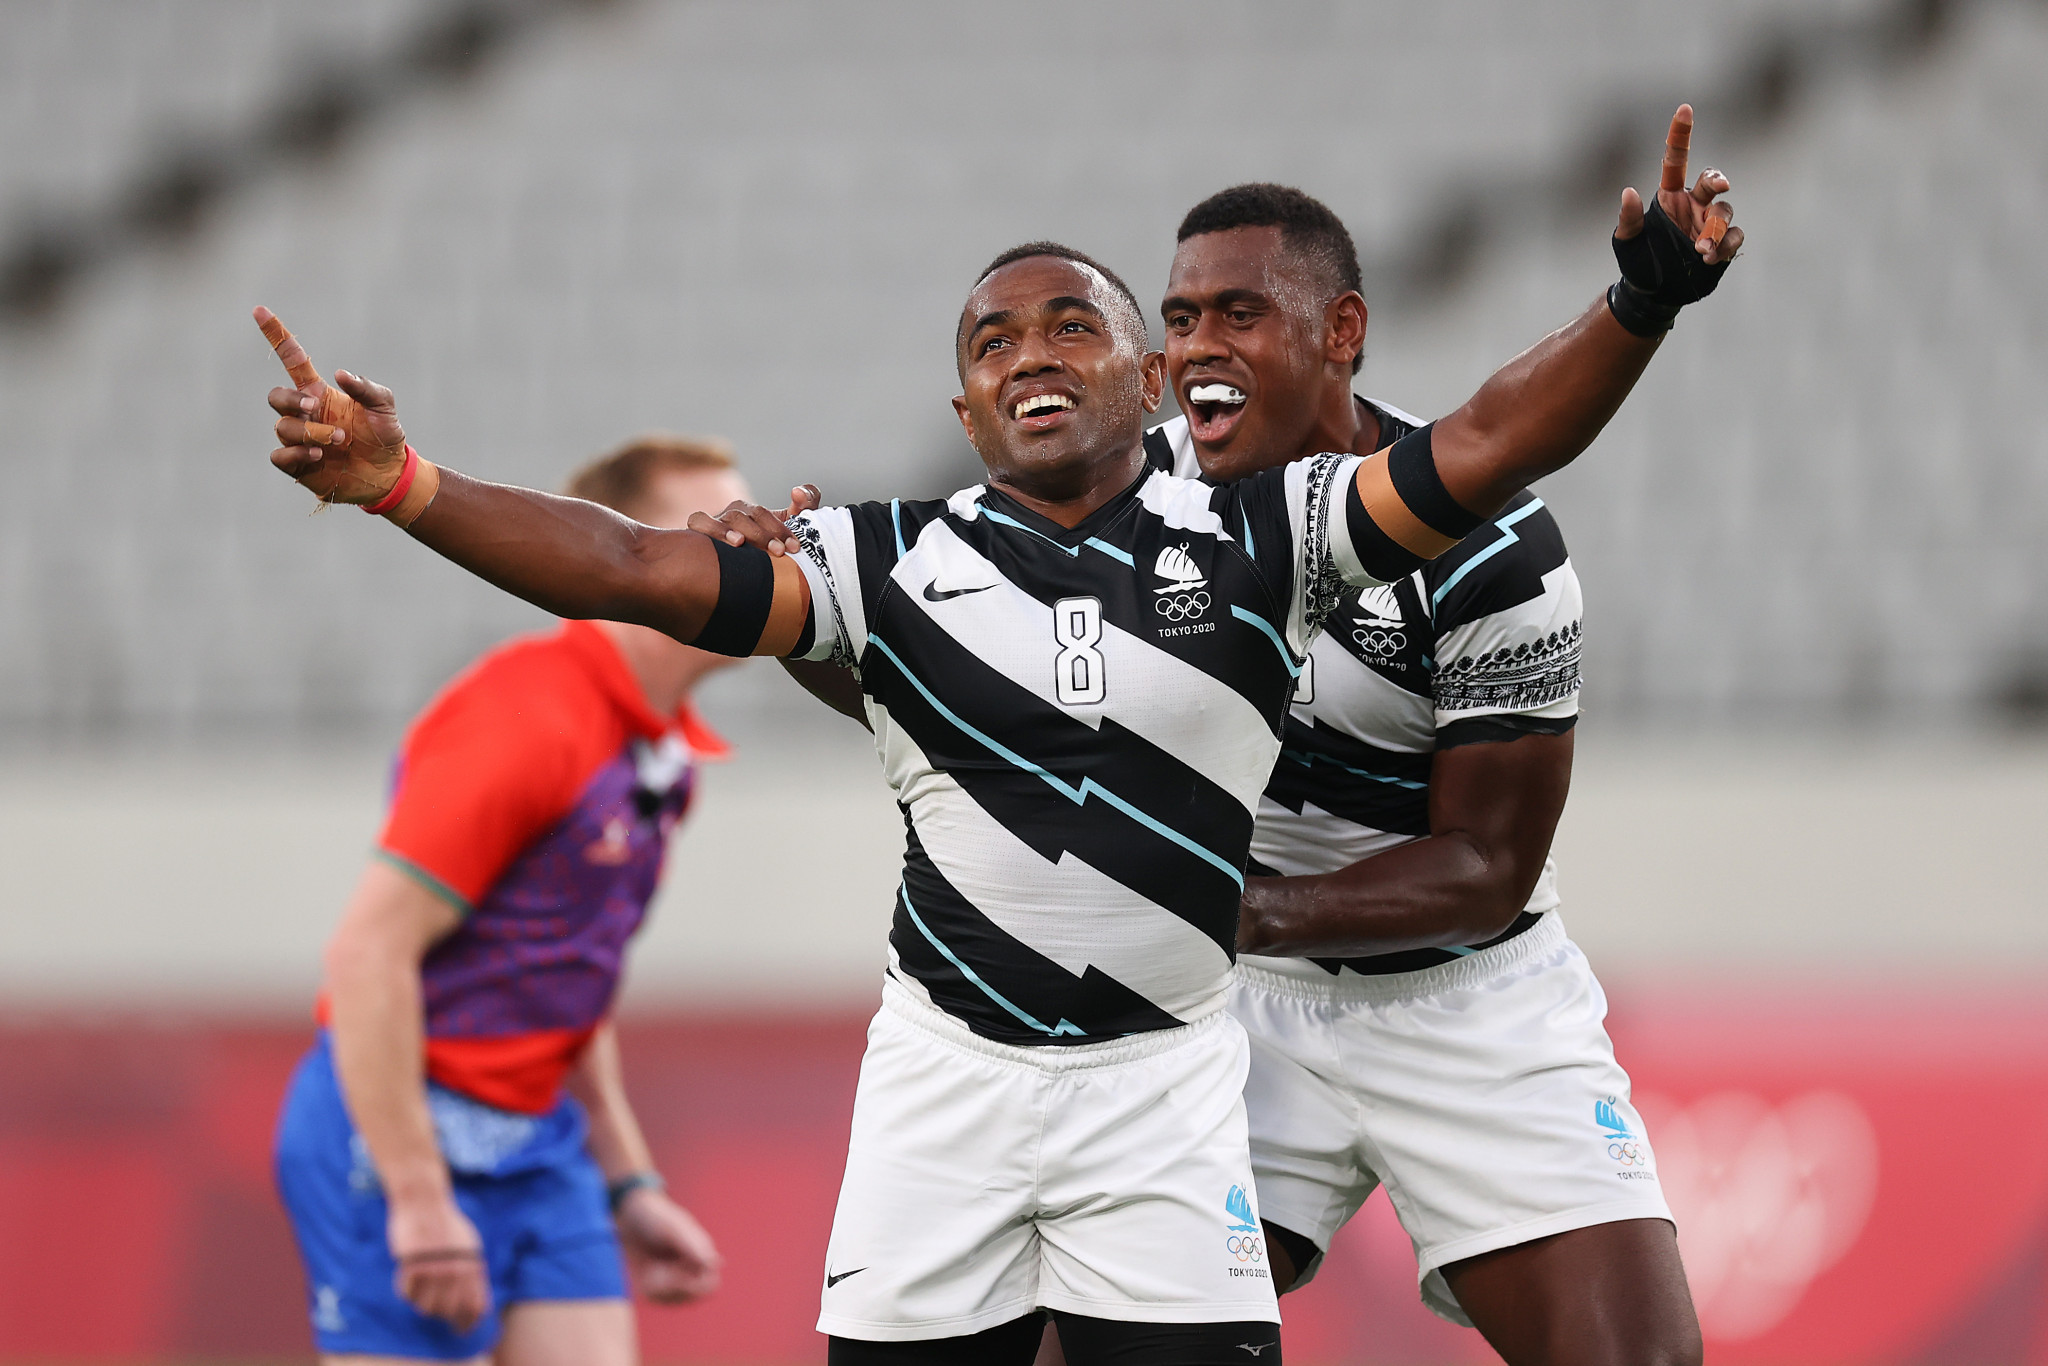 Waisea Nacuqu celebrates after landing a last-gasp drop goal to seal victory for Fiji ©Getty Images